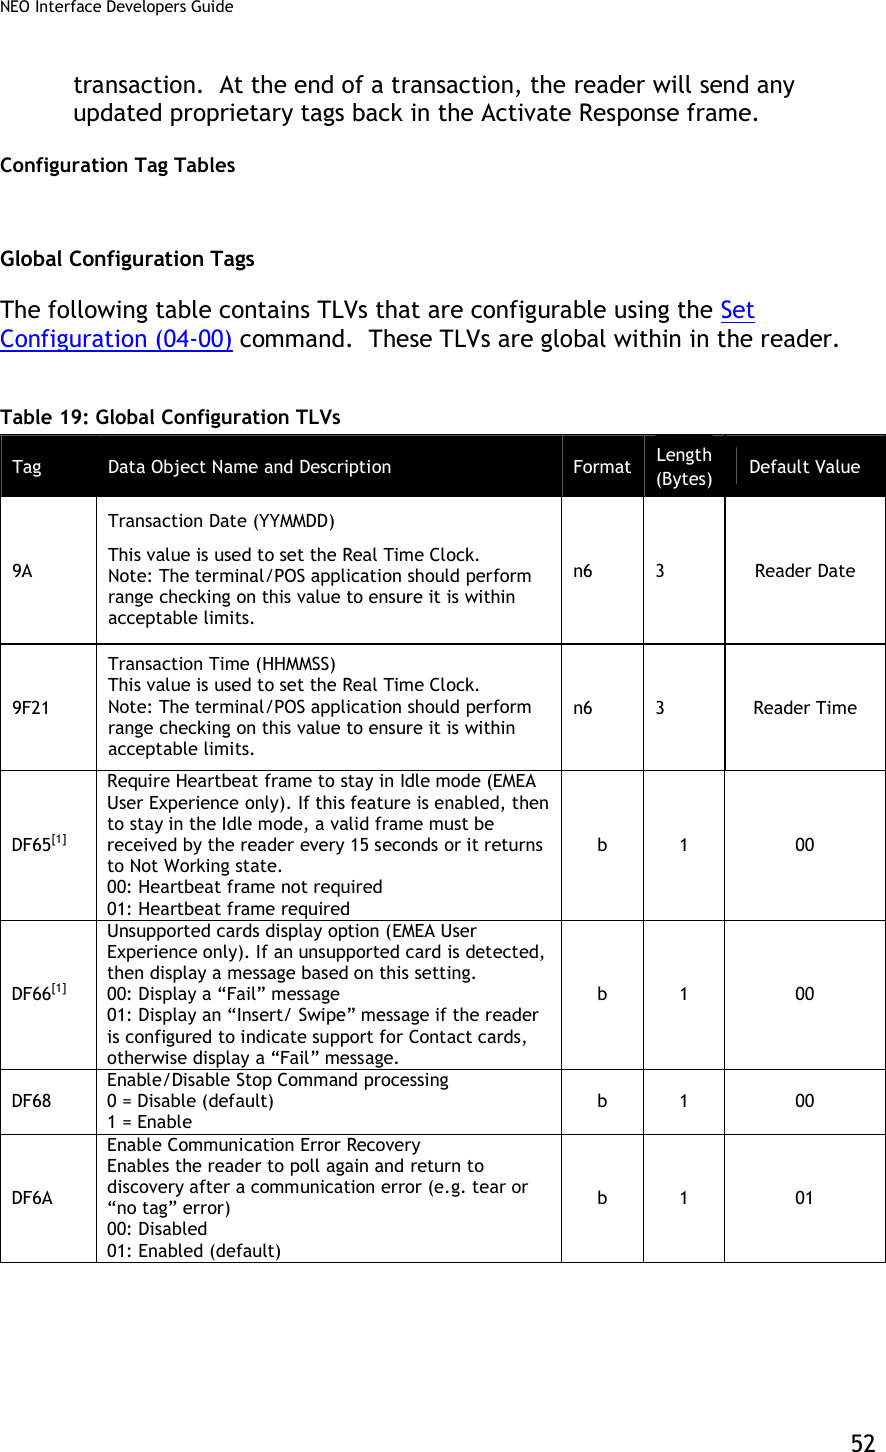 NEO Interface Developers Guide           52 transaction.  At the end of a transaction, the reader will send any updated proprietary tags back in the Activate Response frame. Configuration Tag Tables Global Configuration Tags The following table contains TLVs that are configurable using the Set Configuration (04-00) command.  These TLVs are global within in the reader.   Table 19: Global Configuration TLVs Tag  Data Object Name and Description  Format Length (Bytes) Default Value 9A Transaction Date (YYMMDD)  This value is used to set the Real Time Clock.  Note: The terminal/POS application should perform range checking on this value to ensure it is within acceptable limits. n6  3  Reader Date 9F21 Transaction Time (HHMMSS) This value is used to set the Real Time Clock. Note: The terminal/POS application should perform range checking on this value to ensure it is within acceptable limits. n6    3  Reader Time DF65[1] Require Heartbeat frame to stay in Idle mode (EMEA User Experience only). If this feature is enabled, then to stay in the Idle mode, a valid frame must be received by the reader every 15 seconds or it returns to Not Working state. 00: Heartbeat frame not required 01: Heartbeat frame required  b  1  00 DF66[1] Unsupported cards display option (EMEA User Experience only). If an unsupported card is detected, then display a message based on this setting.  00: Display a “Fail” message 01: Display an “Insert/ Swipe” message if the reader is configured to indicate support for Contact cards, otherwise display a “Fail” message.  b  1  00 DF68 Enable/Disable Stop Command processing 0 = Disable (default) 1 = Enable b  1  00 DF6A Enable Communication Error Recovery Enables the reader to poll again and return to discovery after a communication error (e.g. tear or “no tag” error) 00: Disabled 01: Enabled (default) b  1  01 